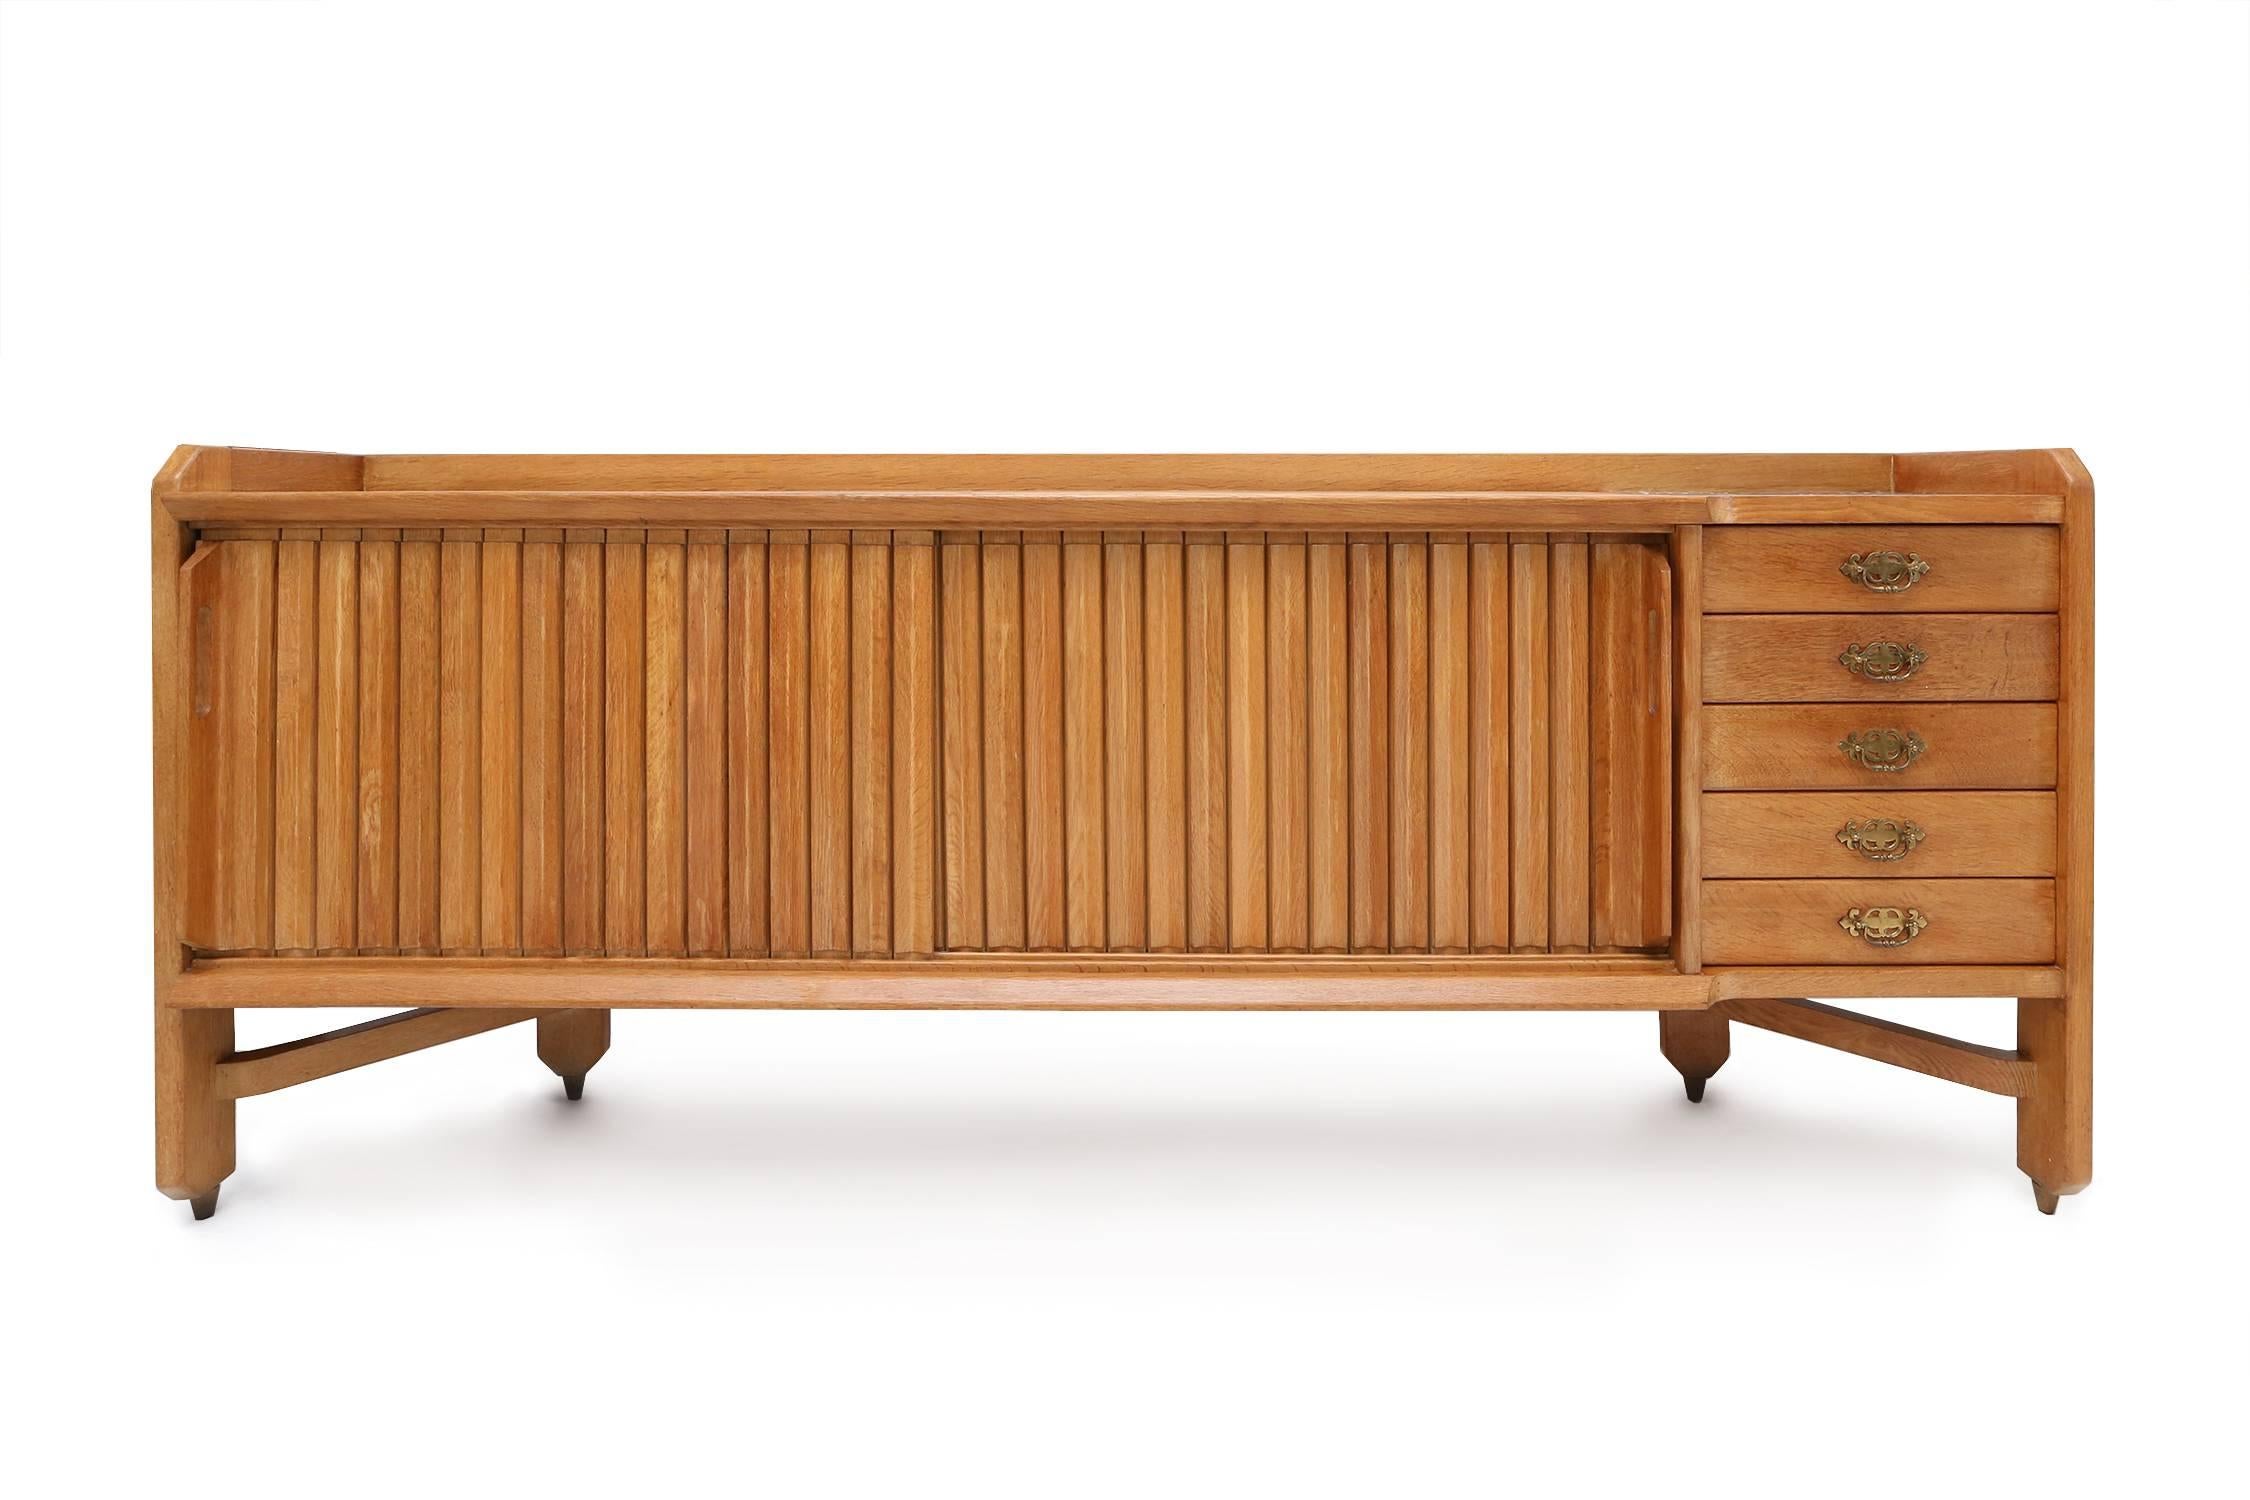 Guillerme et Chambron sideboard in beautiful natural oak.

France, 1960s.

Ceramic tile inlay on the top and wabi-sabi detailing.